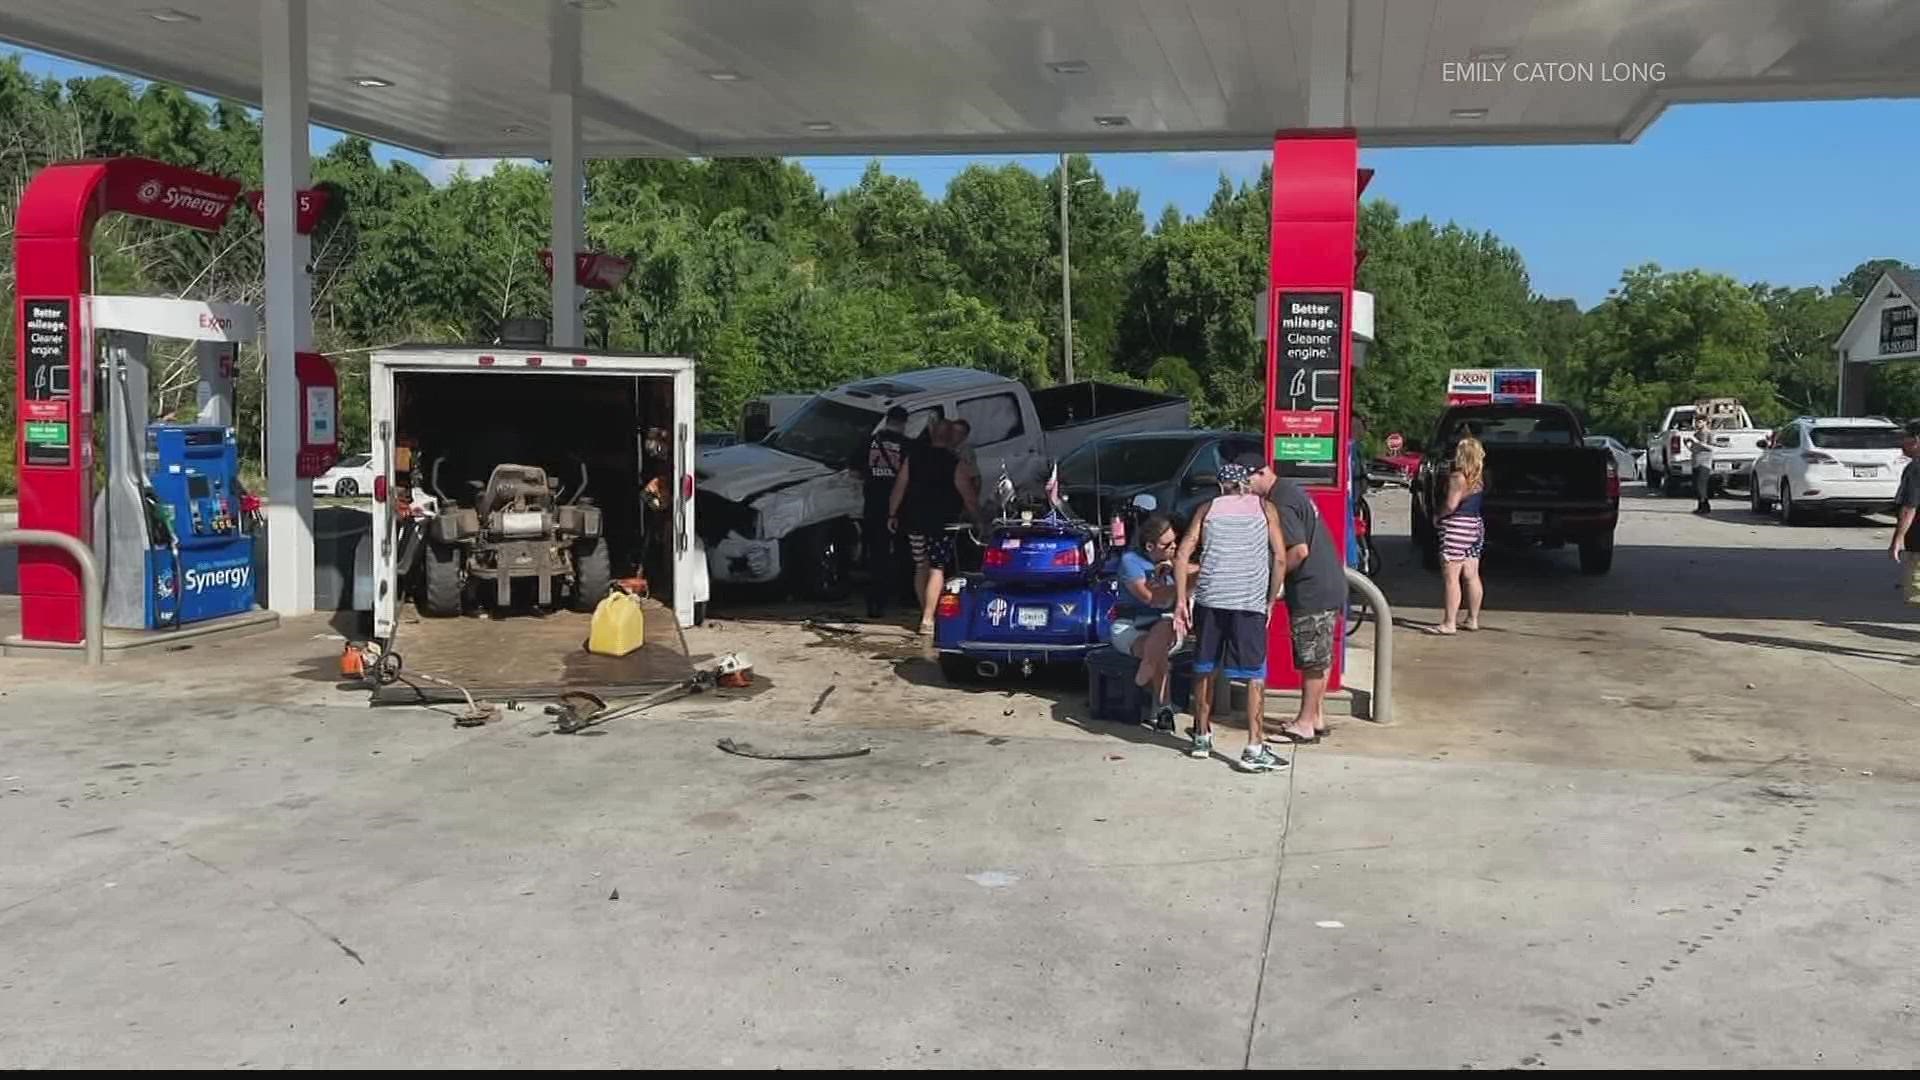 A Paulding County gas station is open again after a man intentionally crashed his truck into the station on Sunday, according to the sheriff's office.